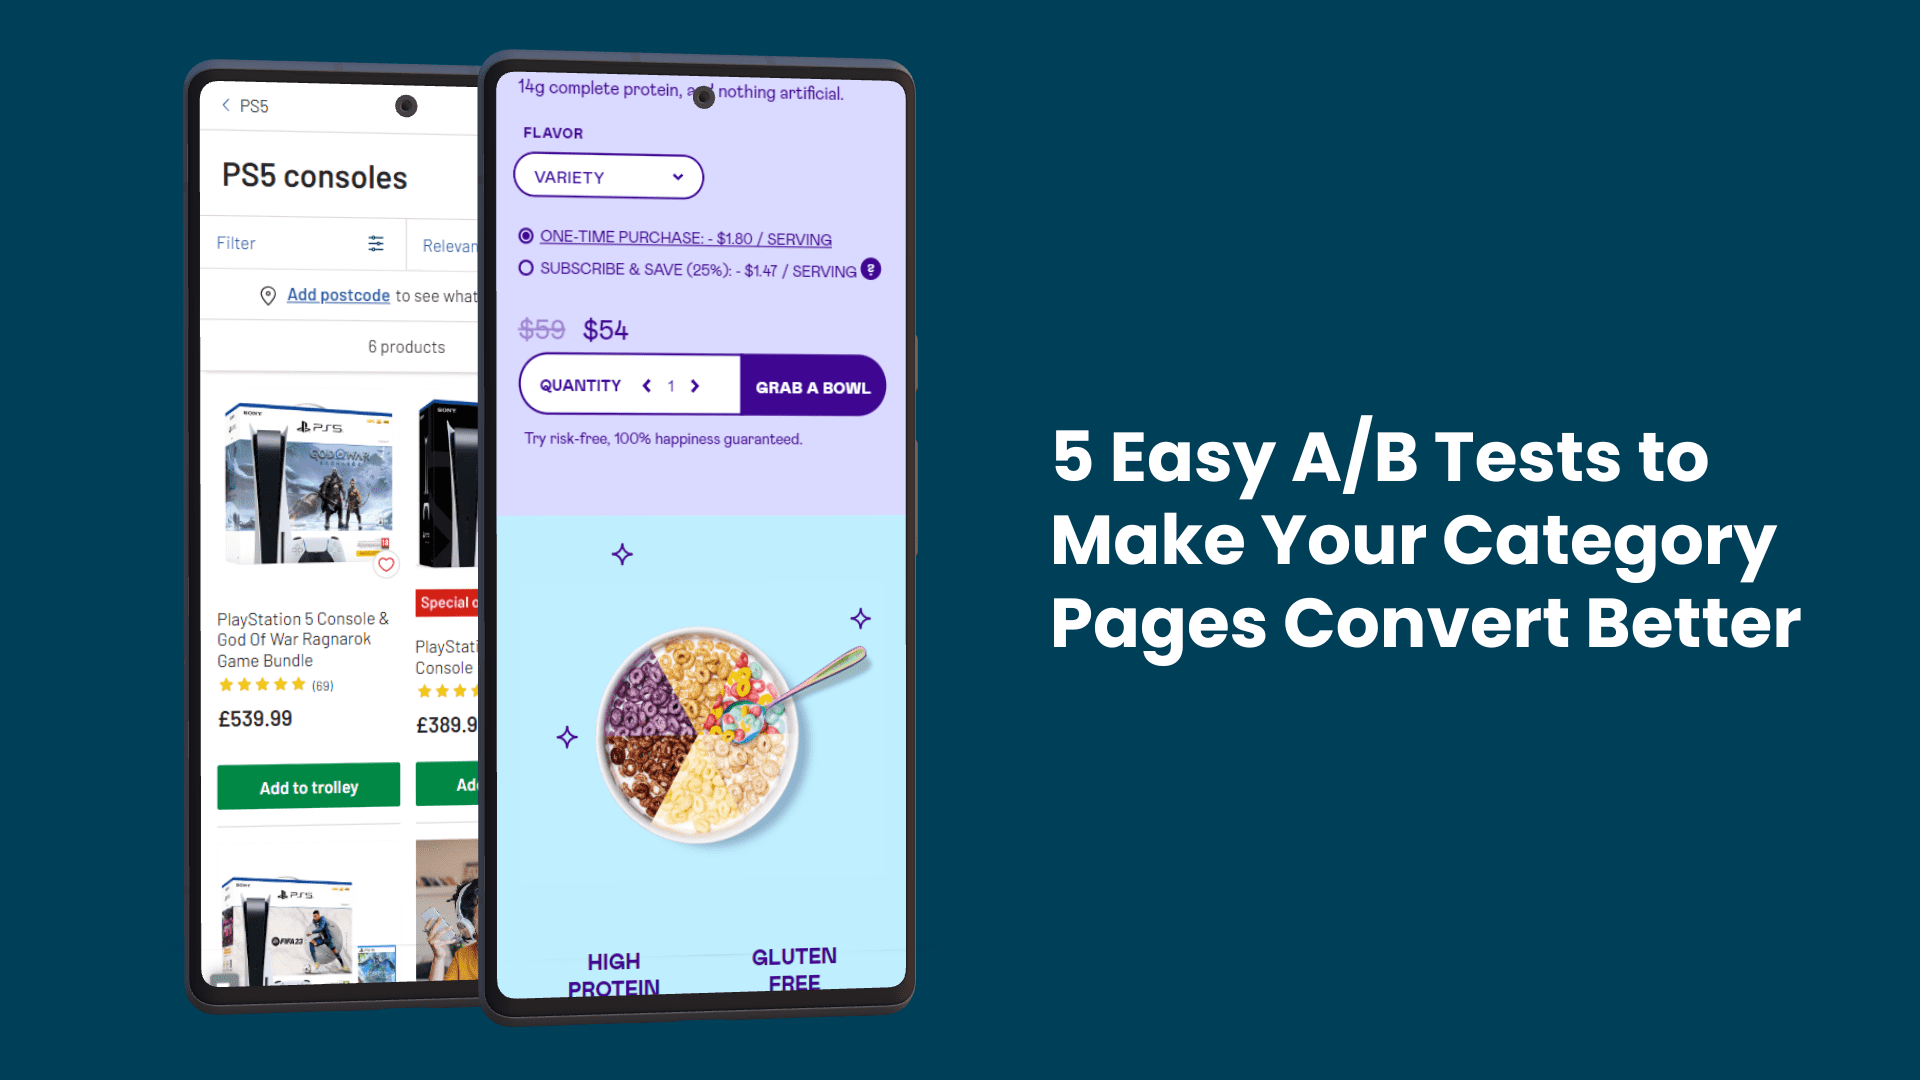 5 Easy A/B Tests to Make Your Category Pages Convert Better